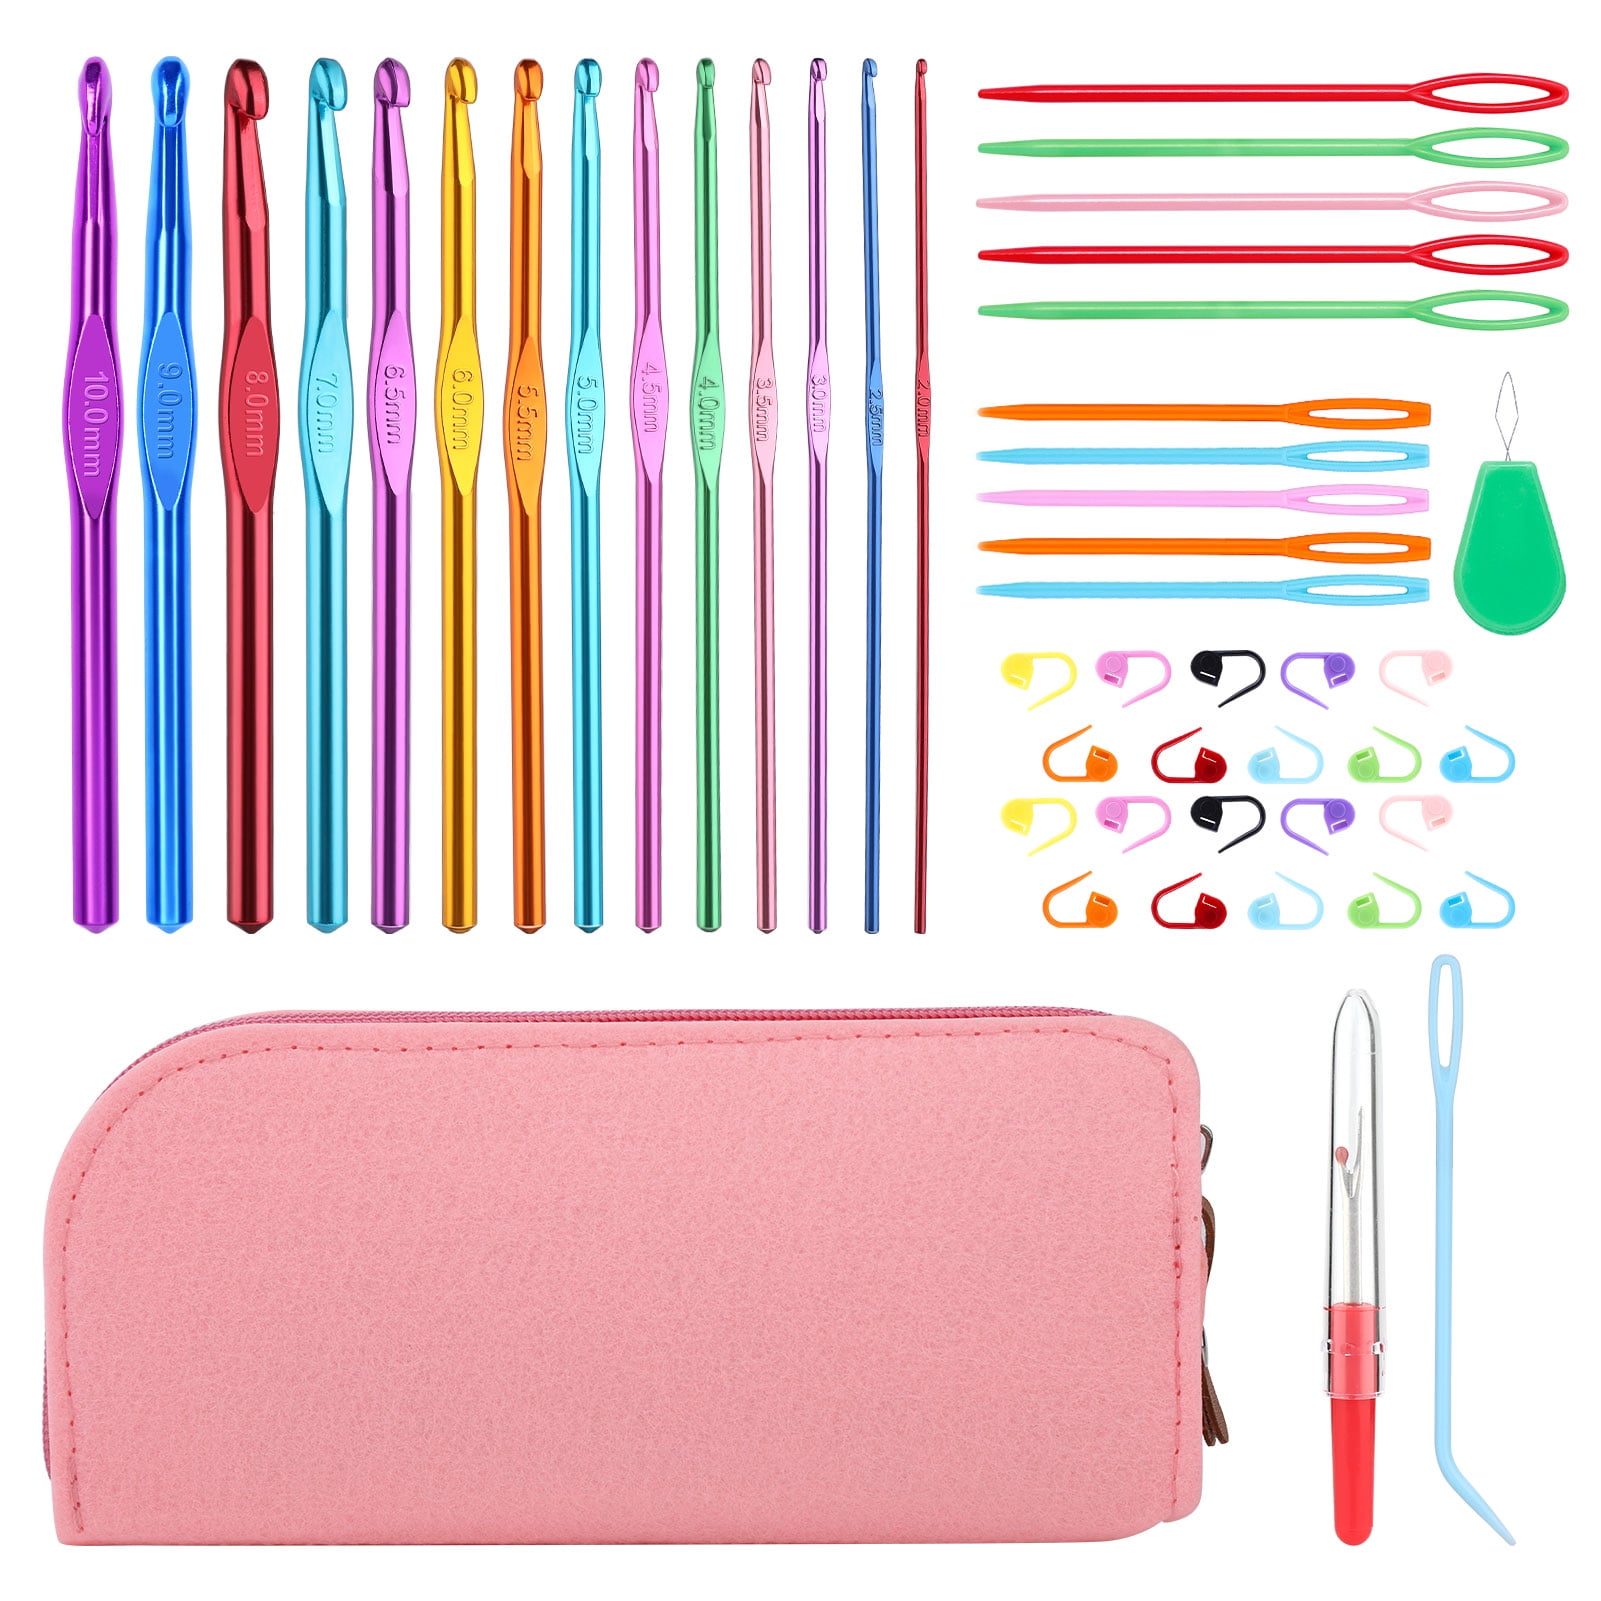 Mayboos 96 Pack Crochet Hooks Set Ergonomic Knitting Needle Weave Yarn Kits with Storage Case and Crochet Needle Accessories for Beginners and Experie